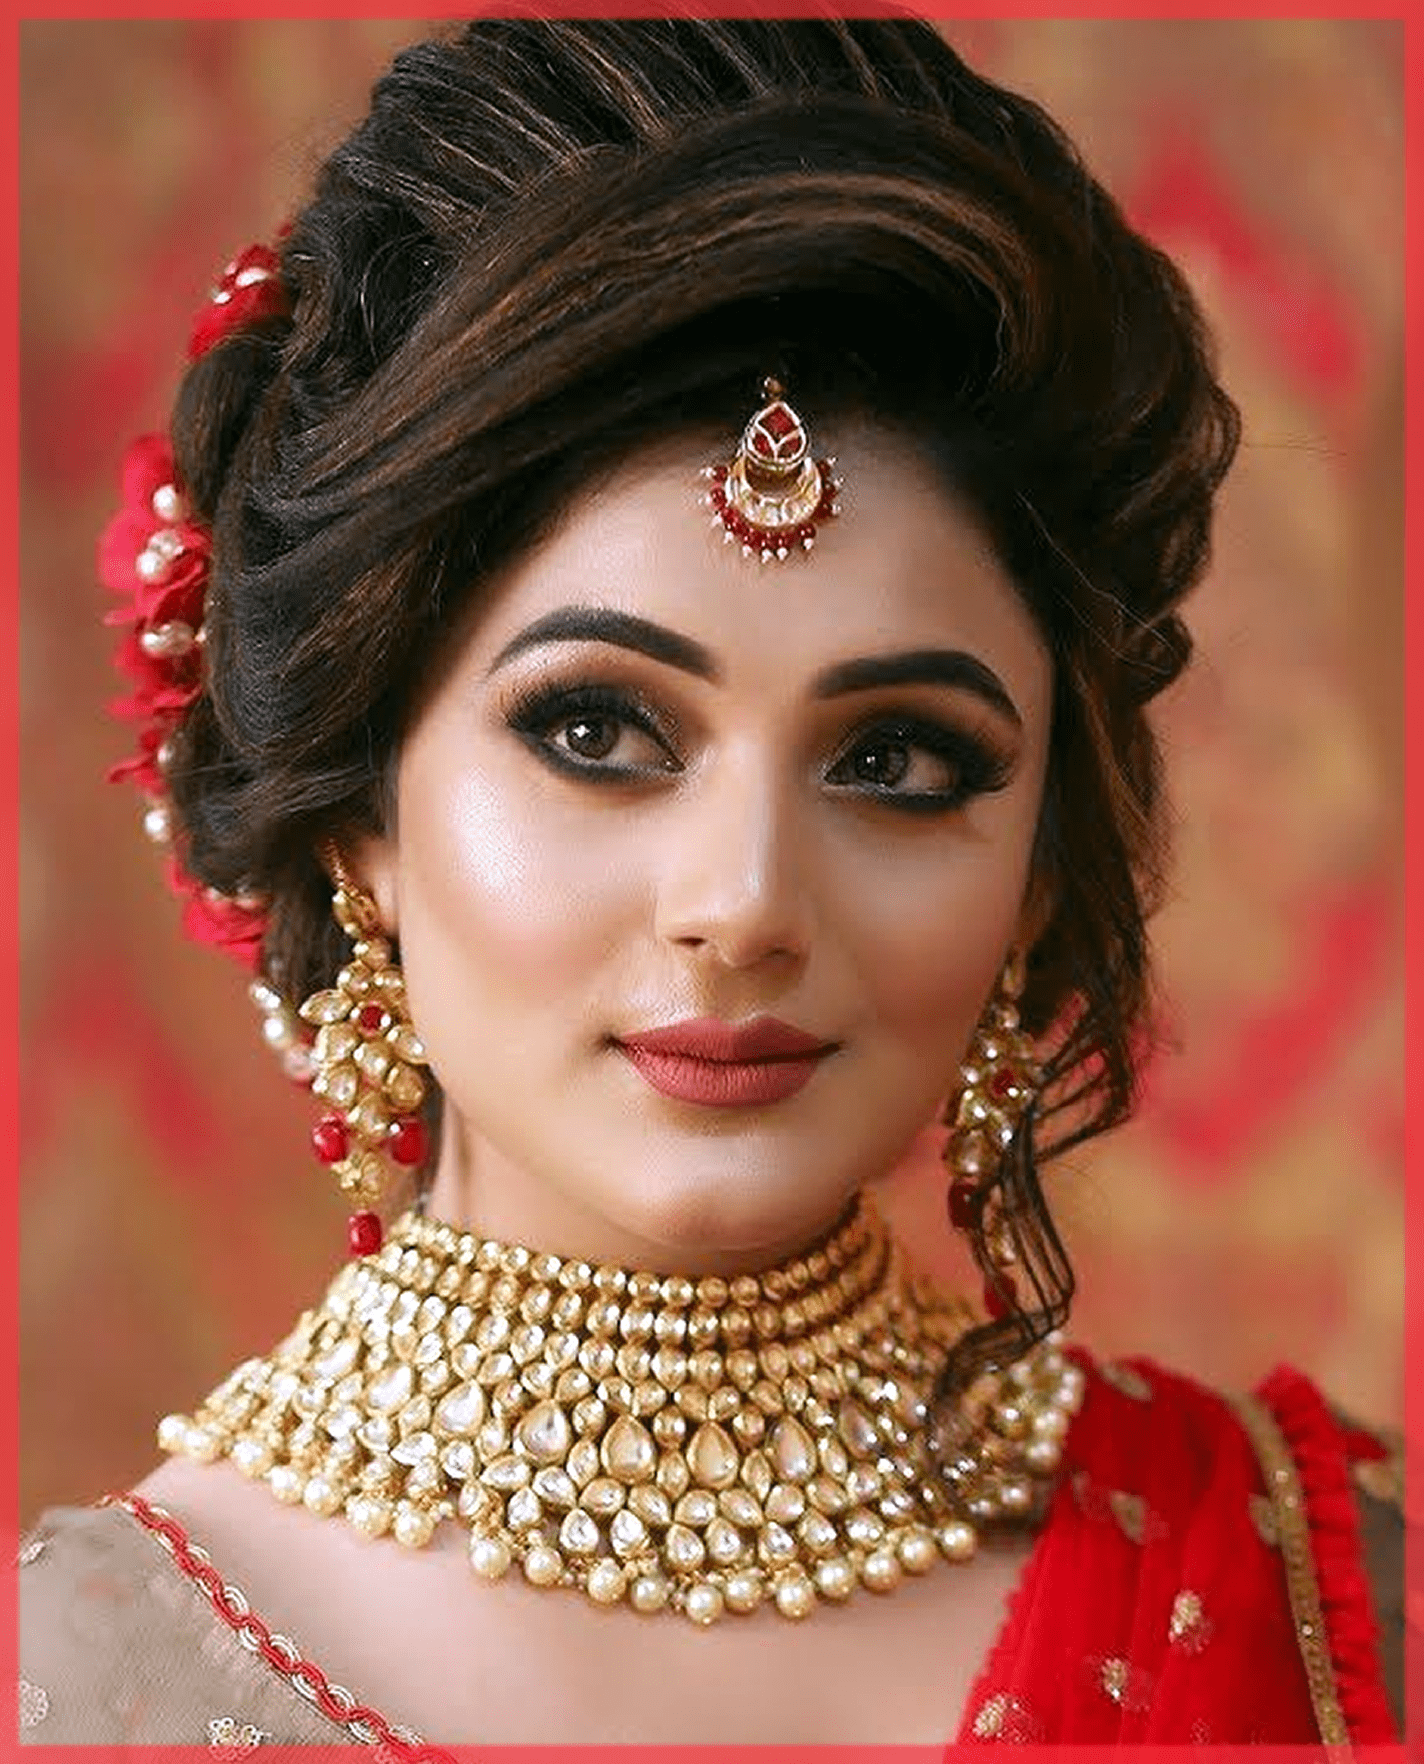 Best Indian Bridal Makeup Step by Step Tutorial with Tips and Tricks